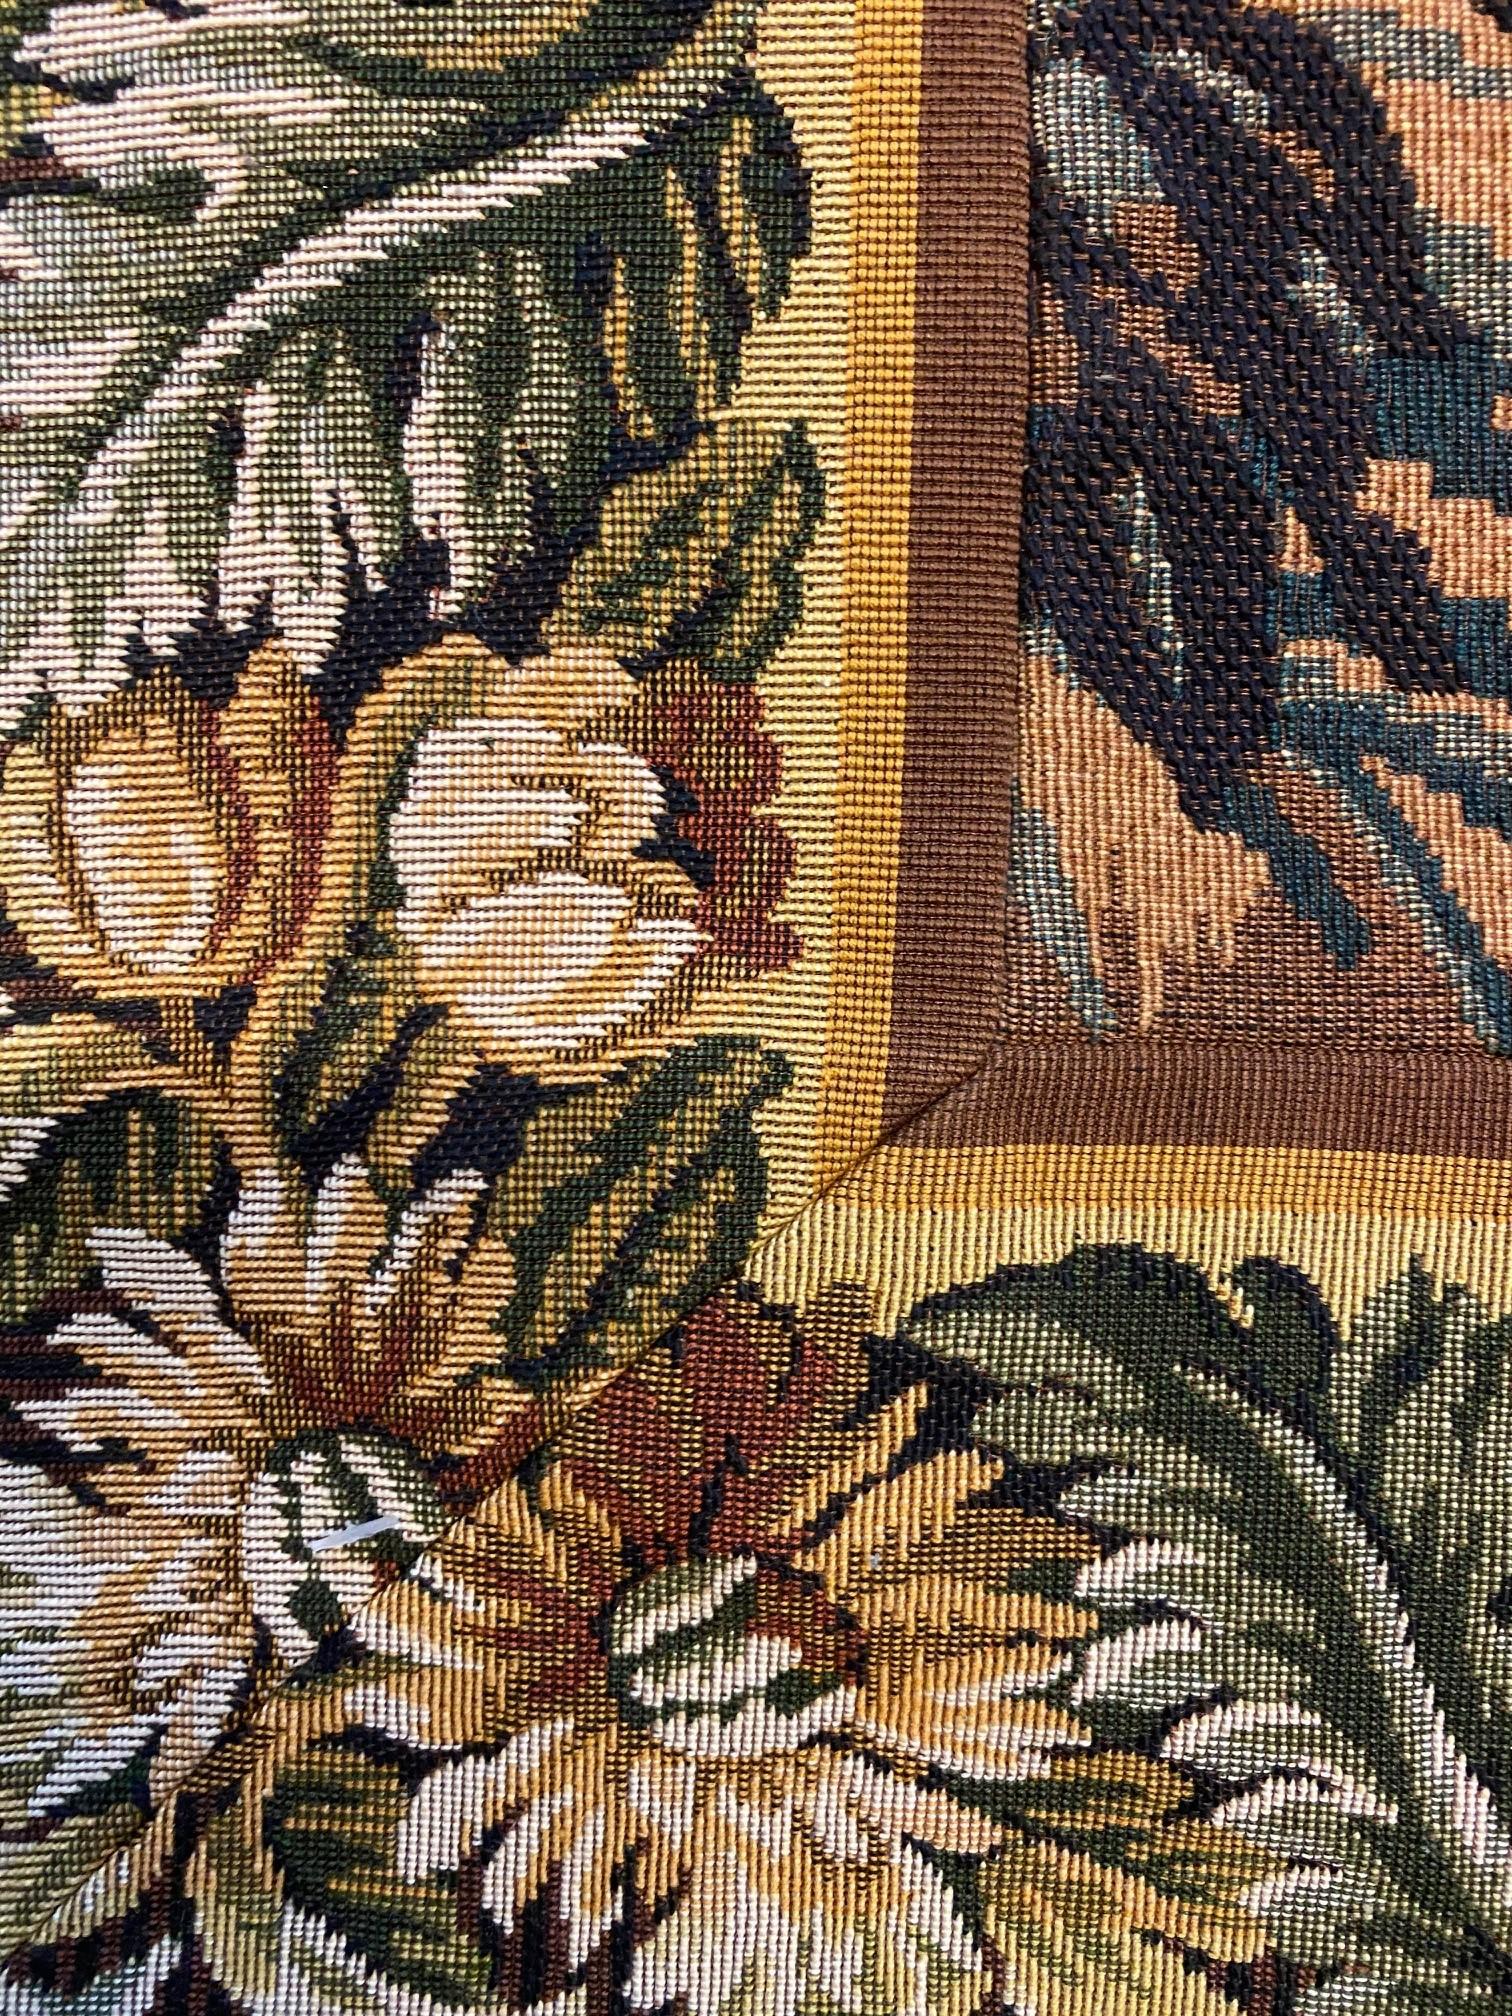 examples of tapestry